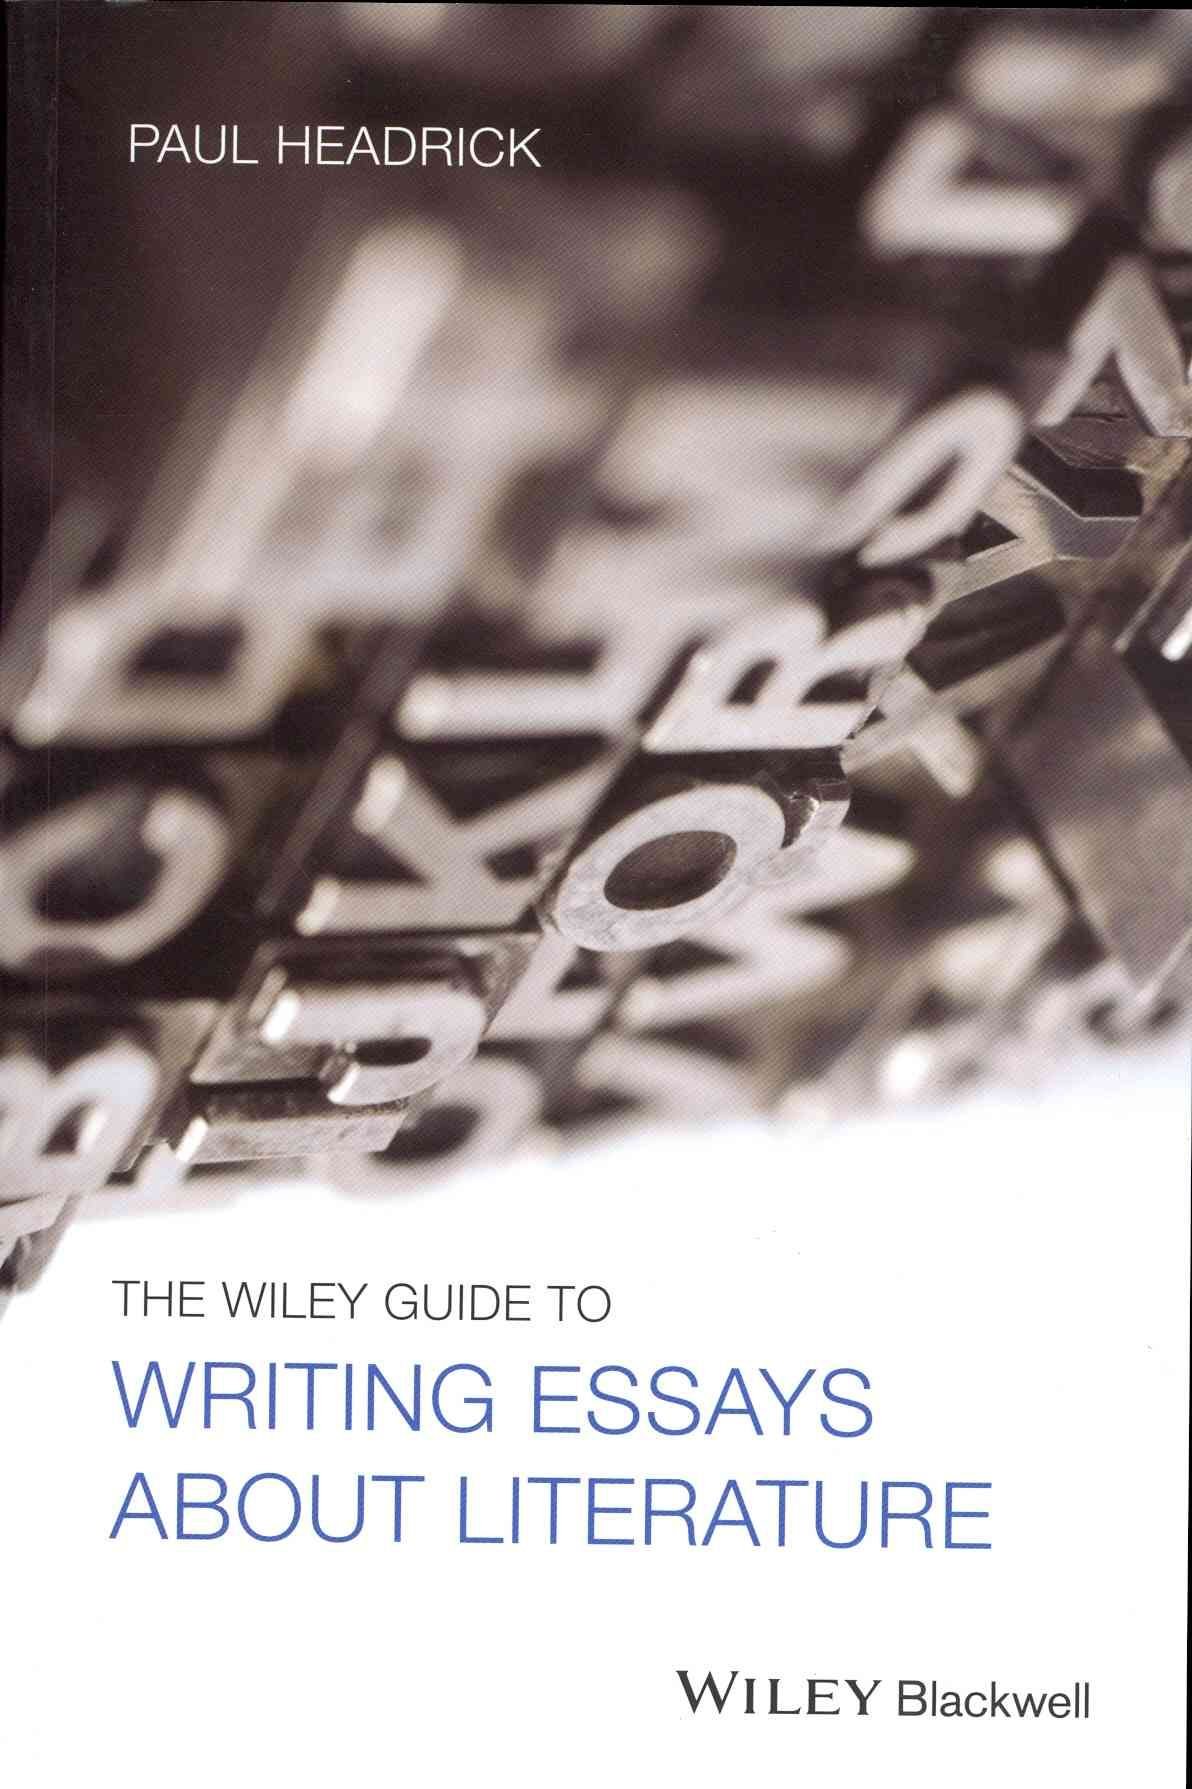 The Wiley Guide to Writing Essays About Literature